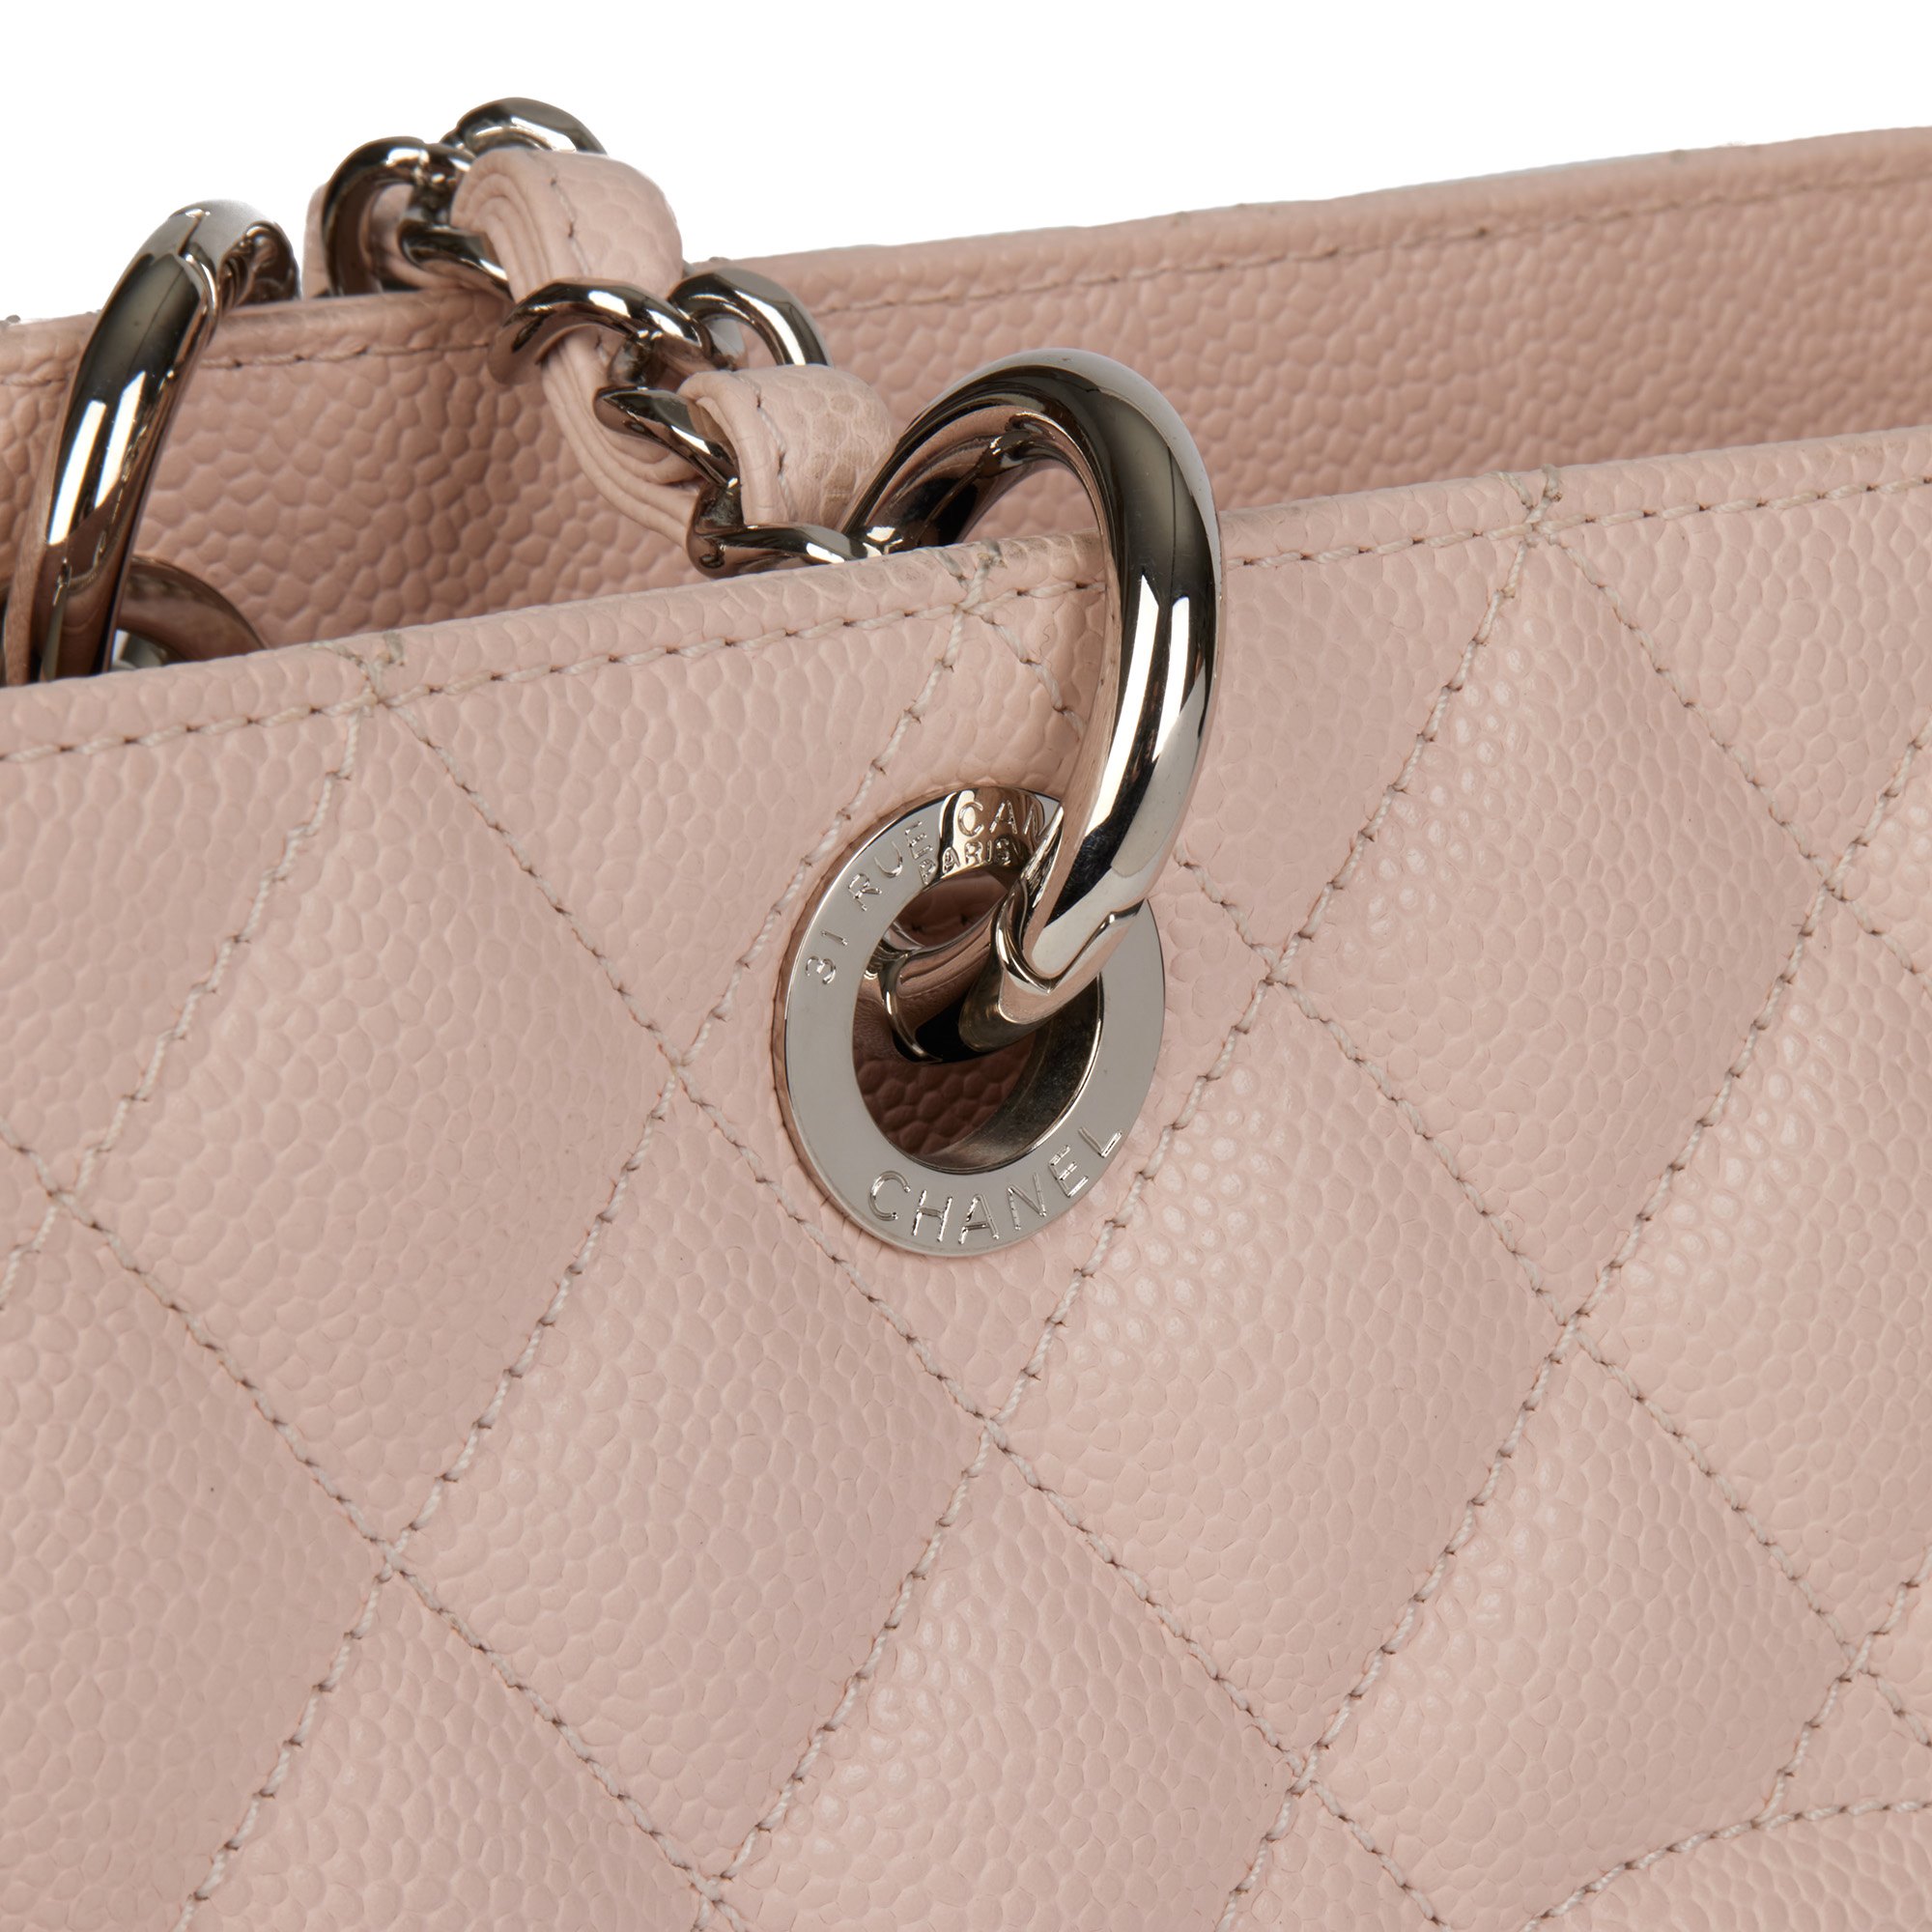 Chanel Pale Pink Quilted Caviar Leather Grand Shopping Tote GST